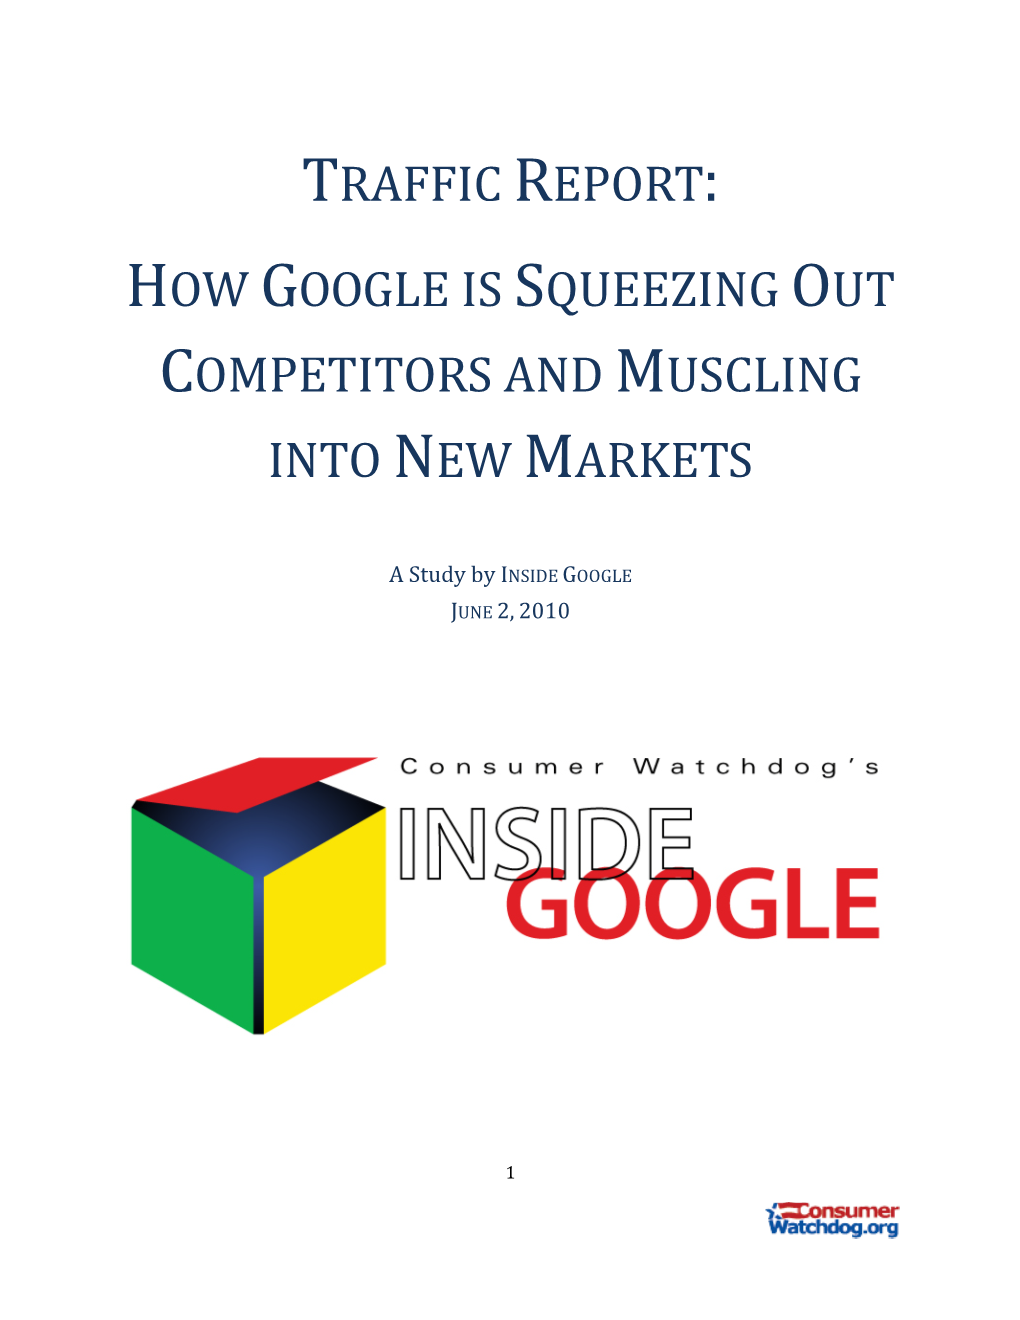 Google Has Been Muscling Into New Web Markets and Greatly Expanding Its Dominance of Other Businesses Since Adopting in 2007 A